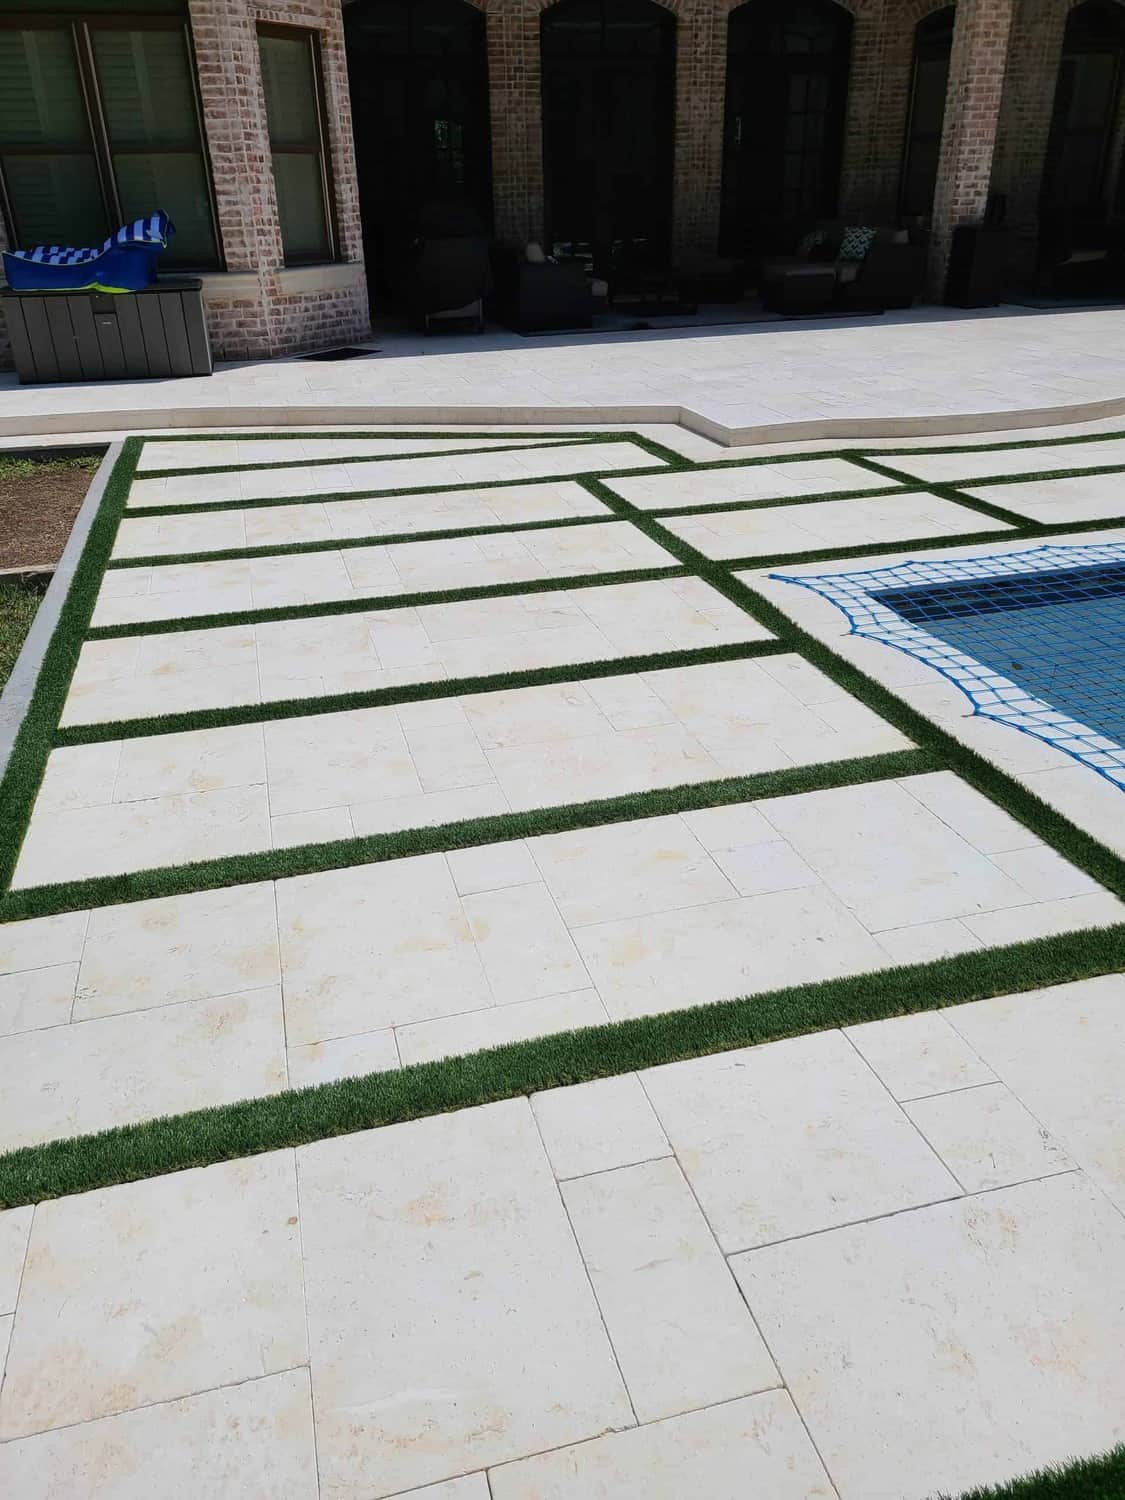 landscaping services completed for Houston, Texas residence